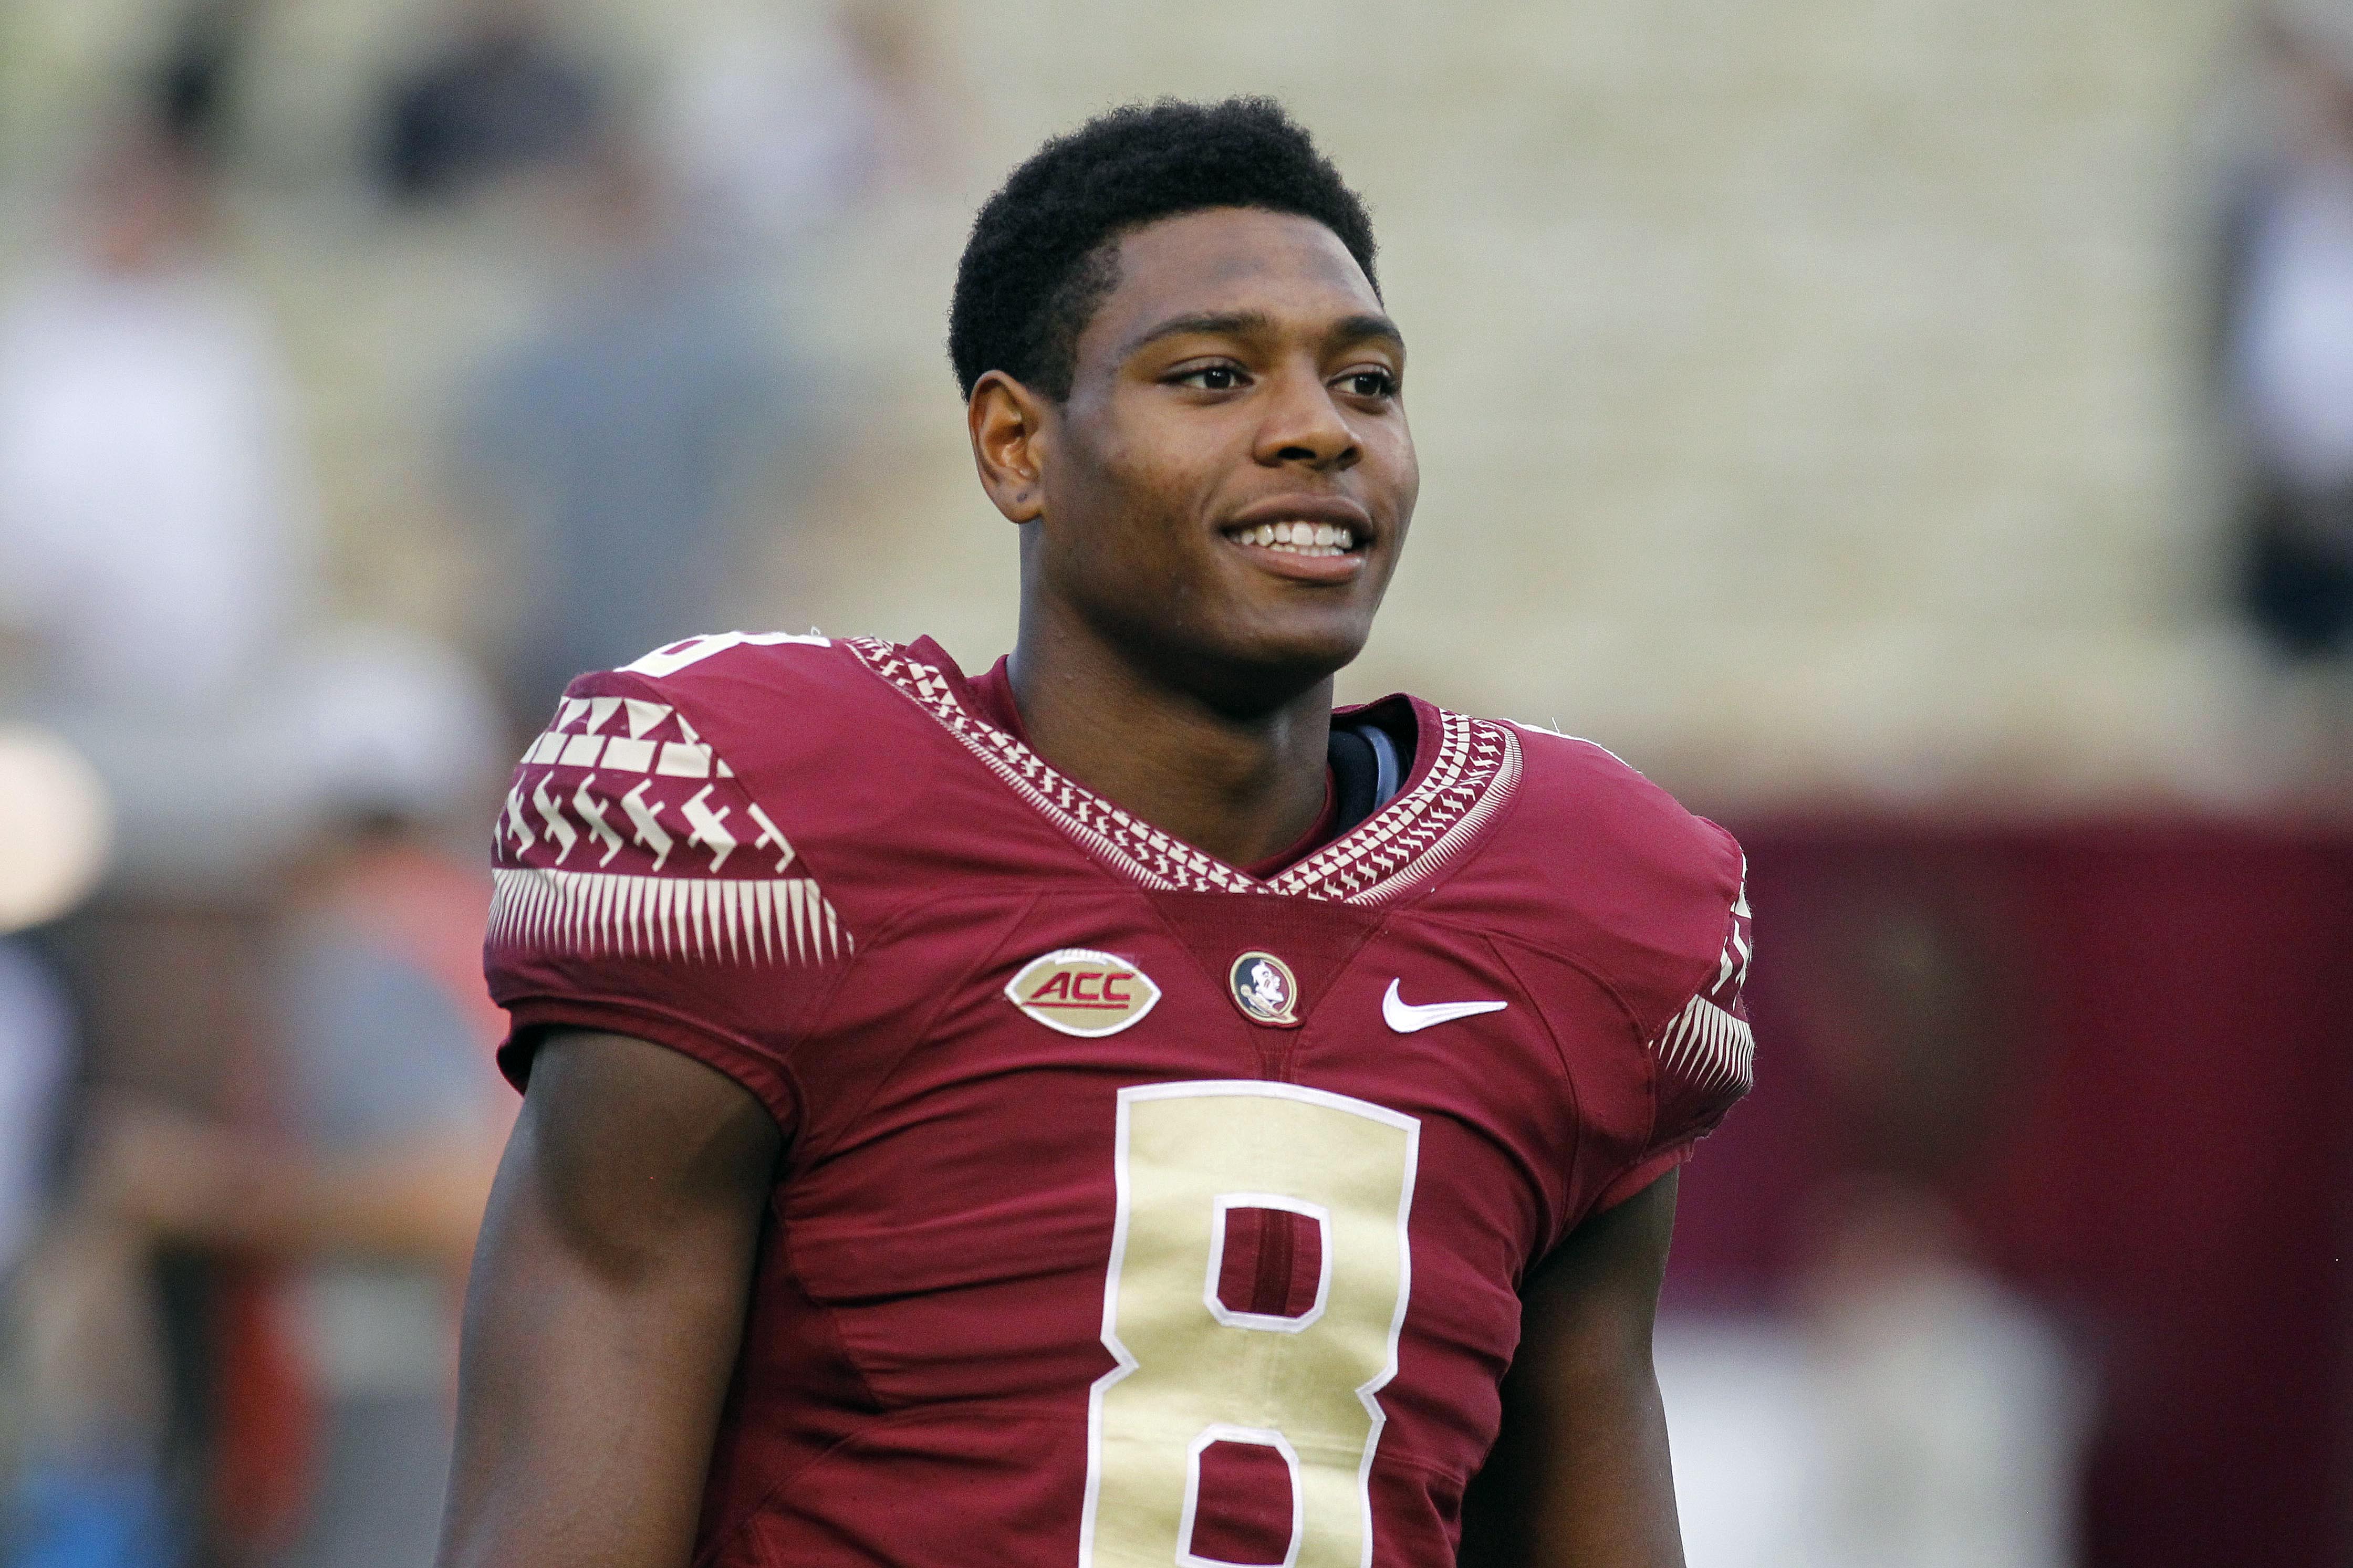 2016 NFL Draft: Jaguars use No. 5 overall pick to select Jalen